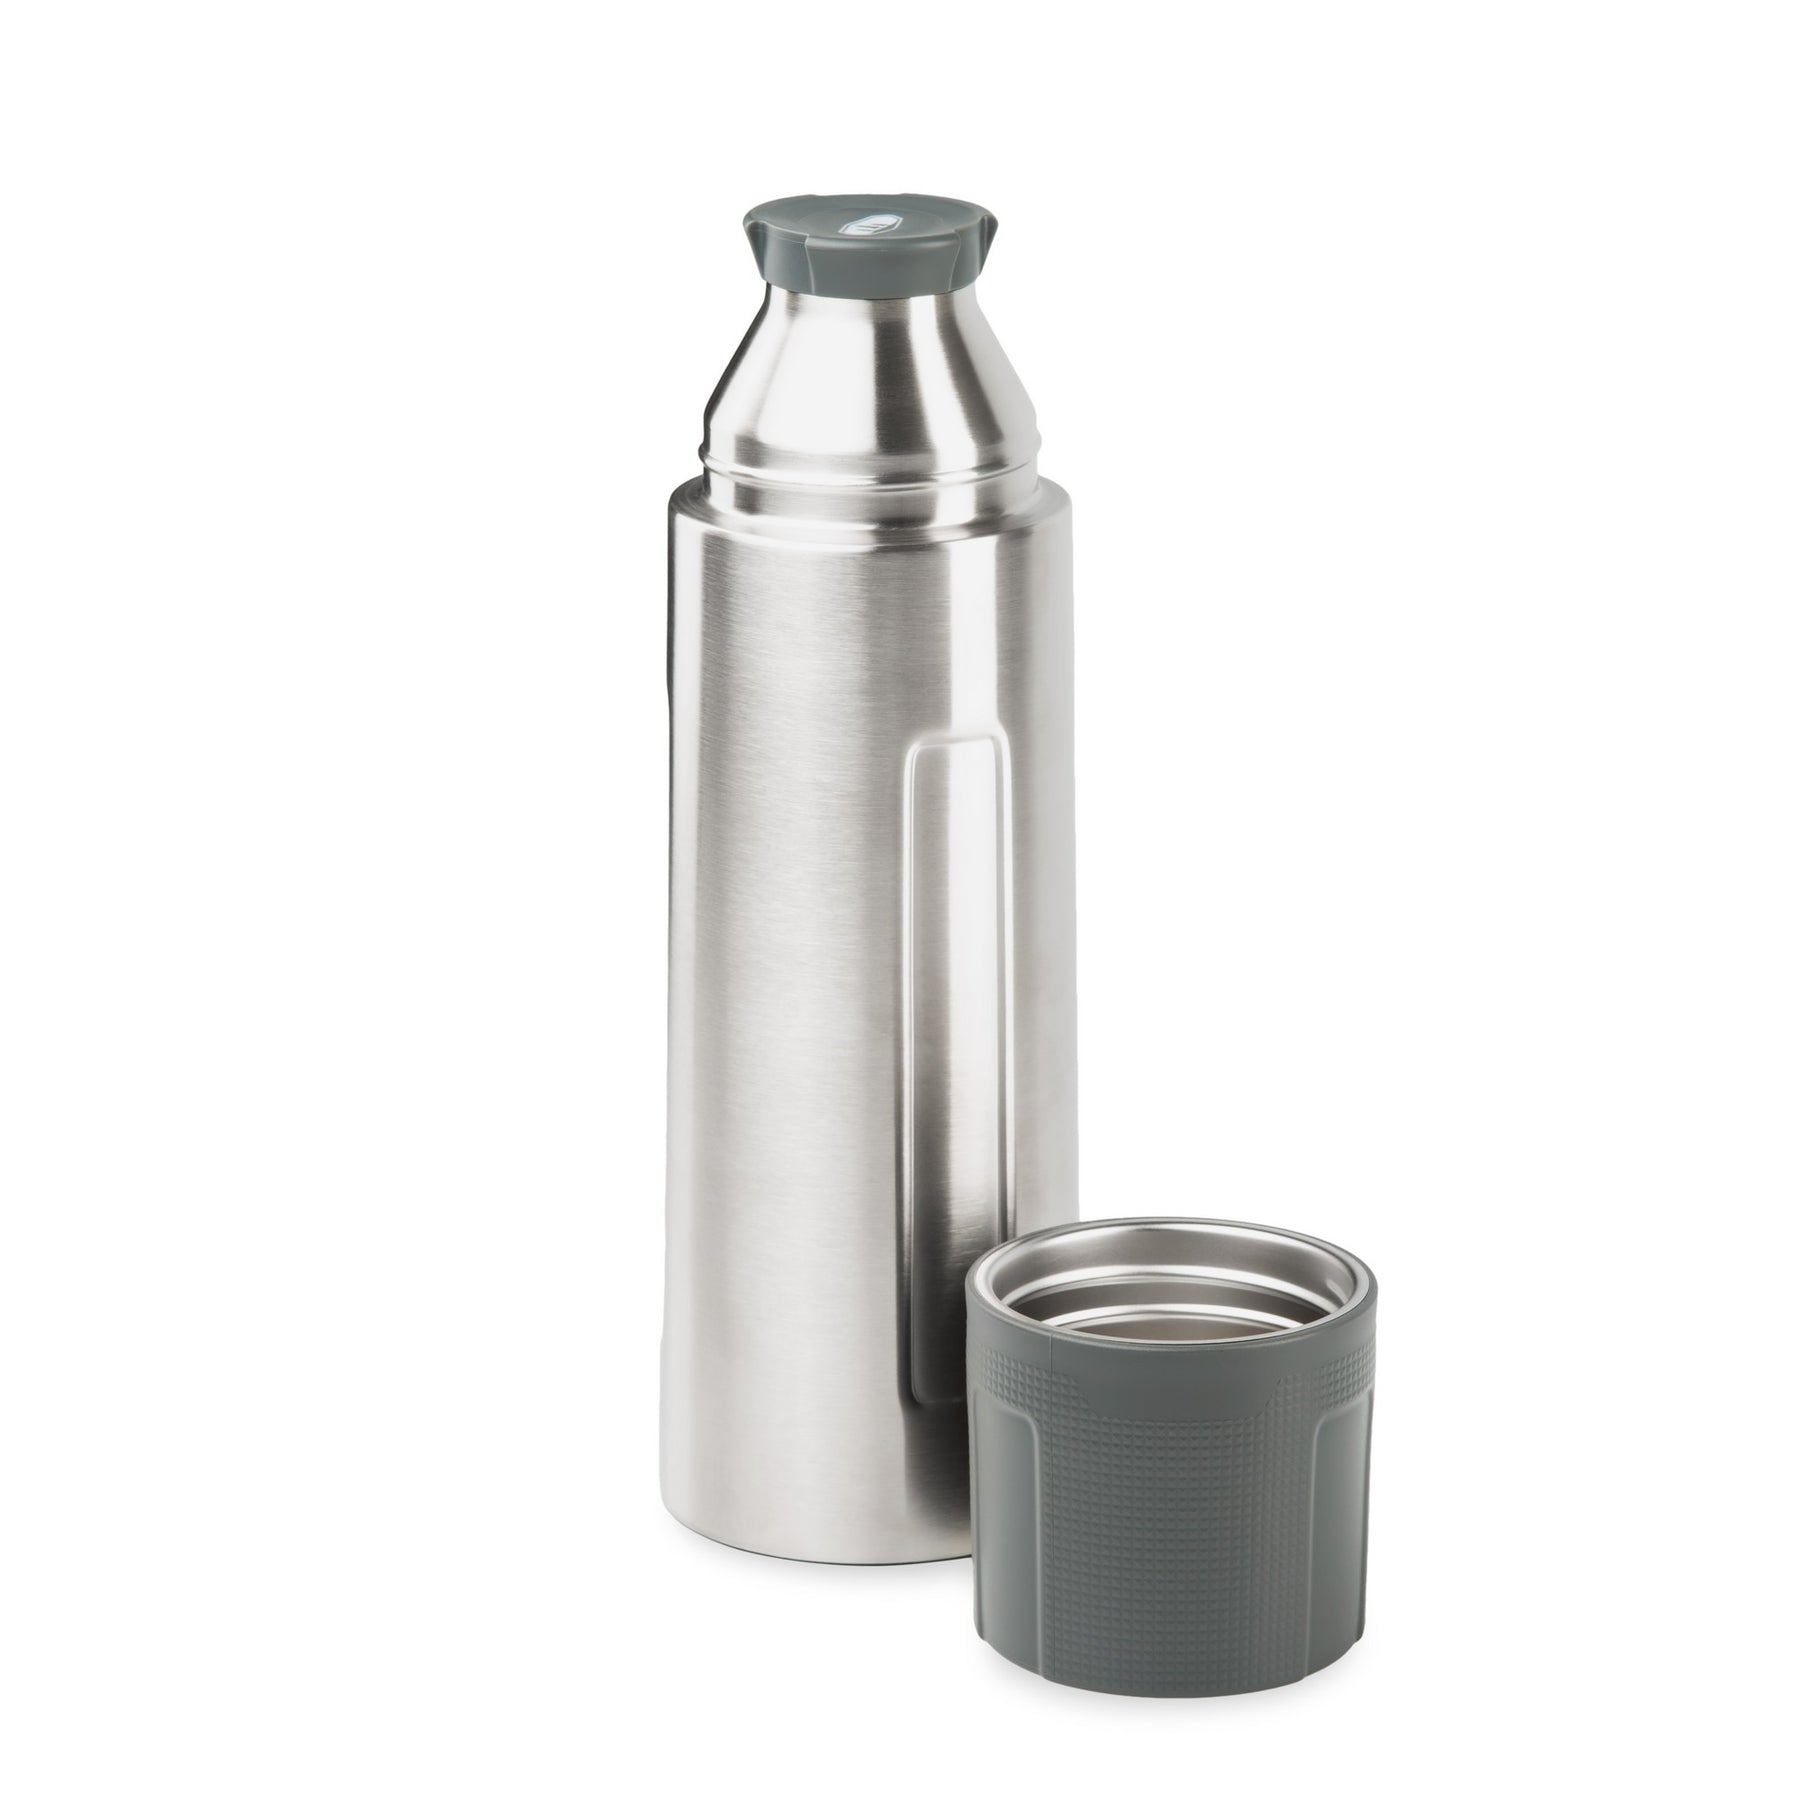 Stainless Steel Insulated Clean Water Bottle - Glacier